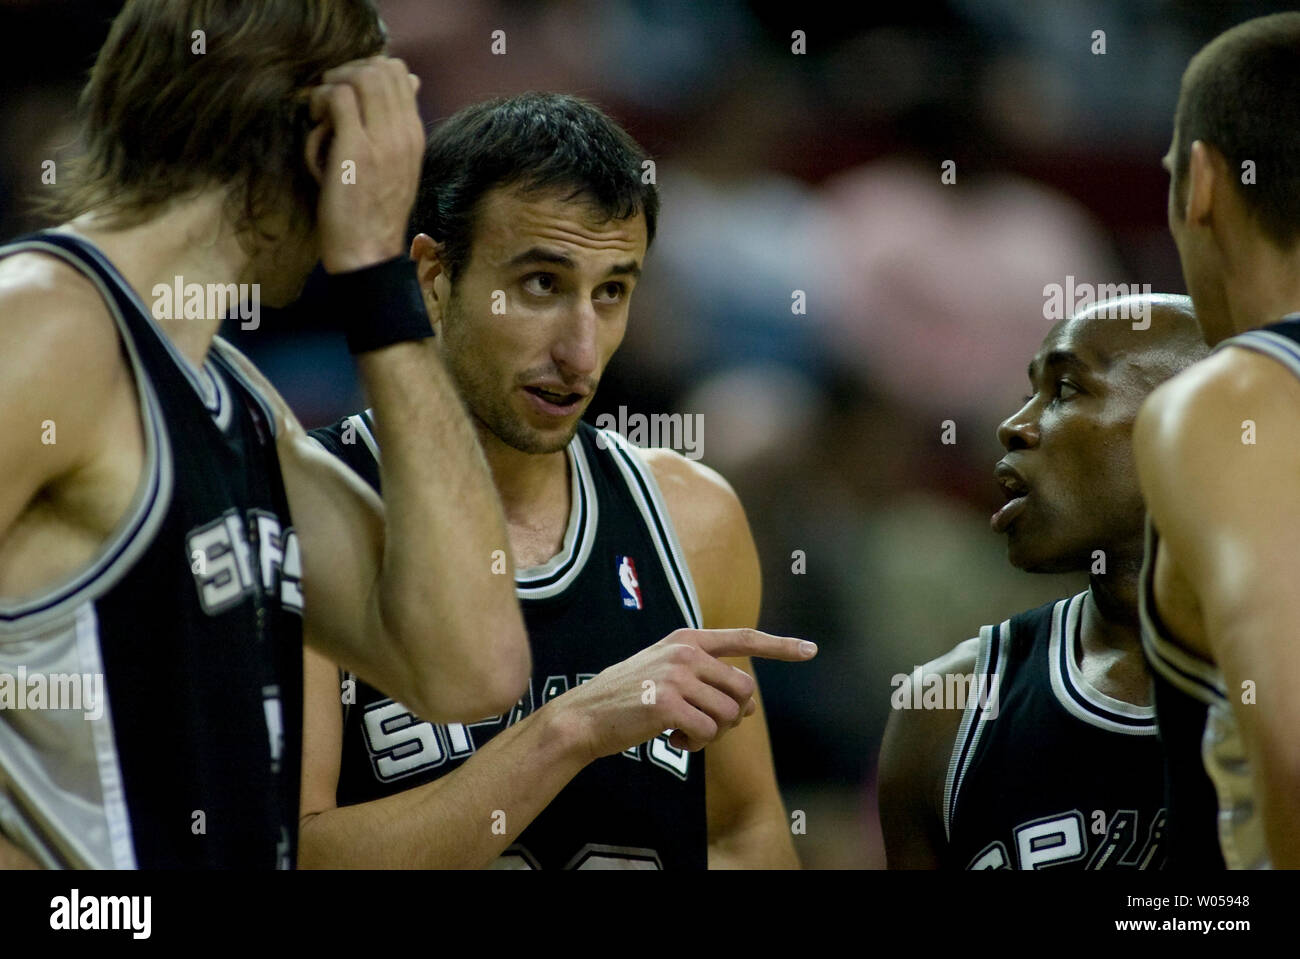 San Antonio Spurs' Manu Ginobili, of Argentina, (C) talks to teammates Ime Udoka (L), Jacque Vaughn (R) and Brent Barry during a timeout against the  Seattle Supersonics' in the first half at the Key Arena in Seattle on November 25, 2007. (UPI Photo/Jim Bryant). Stock Photo